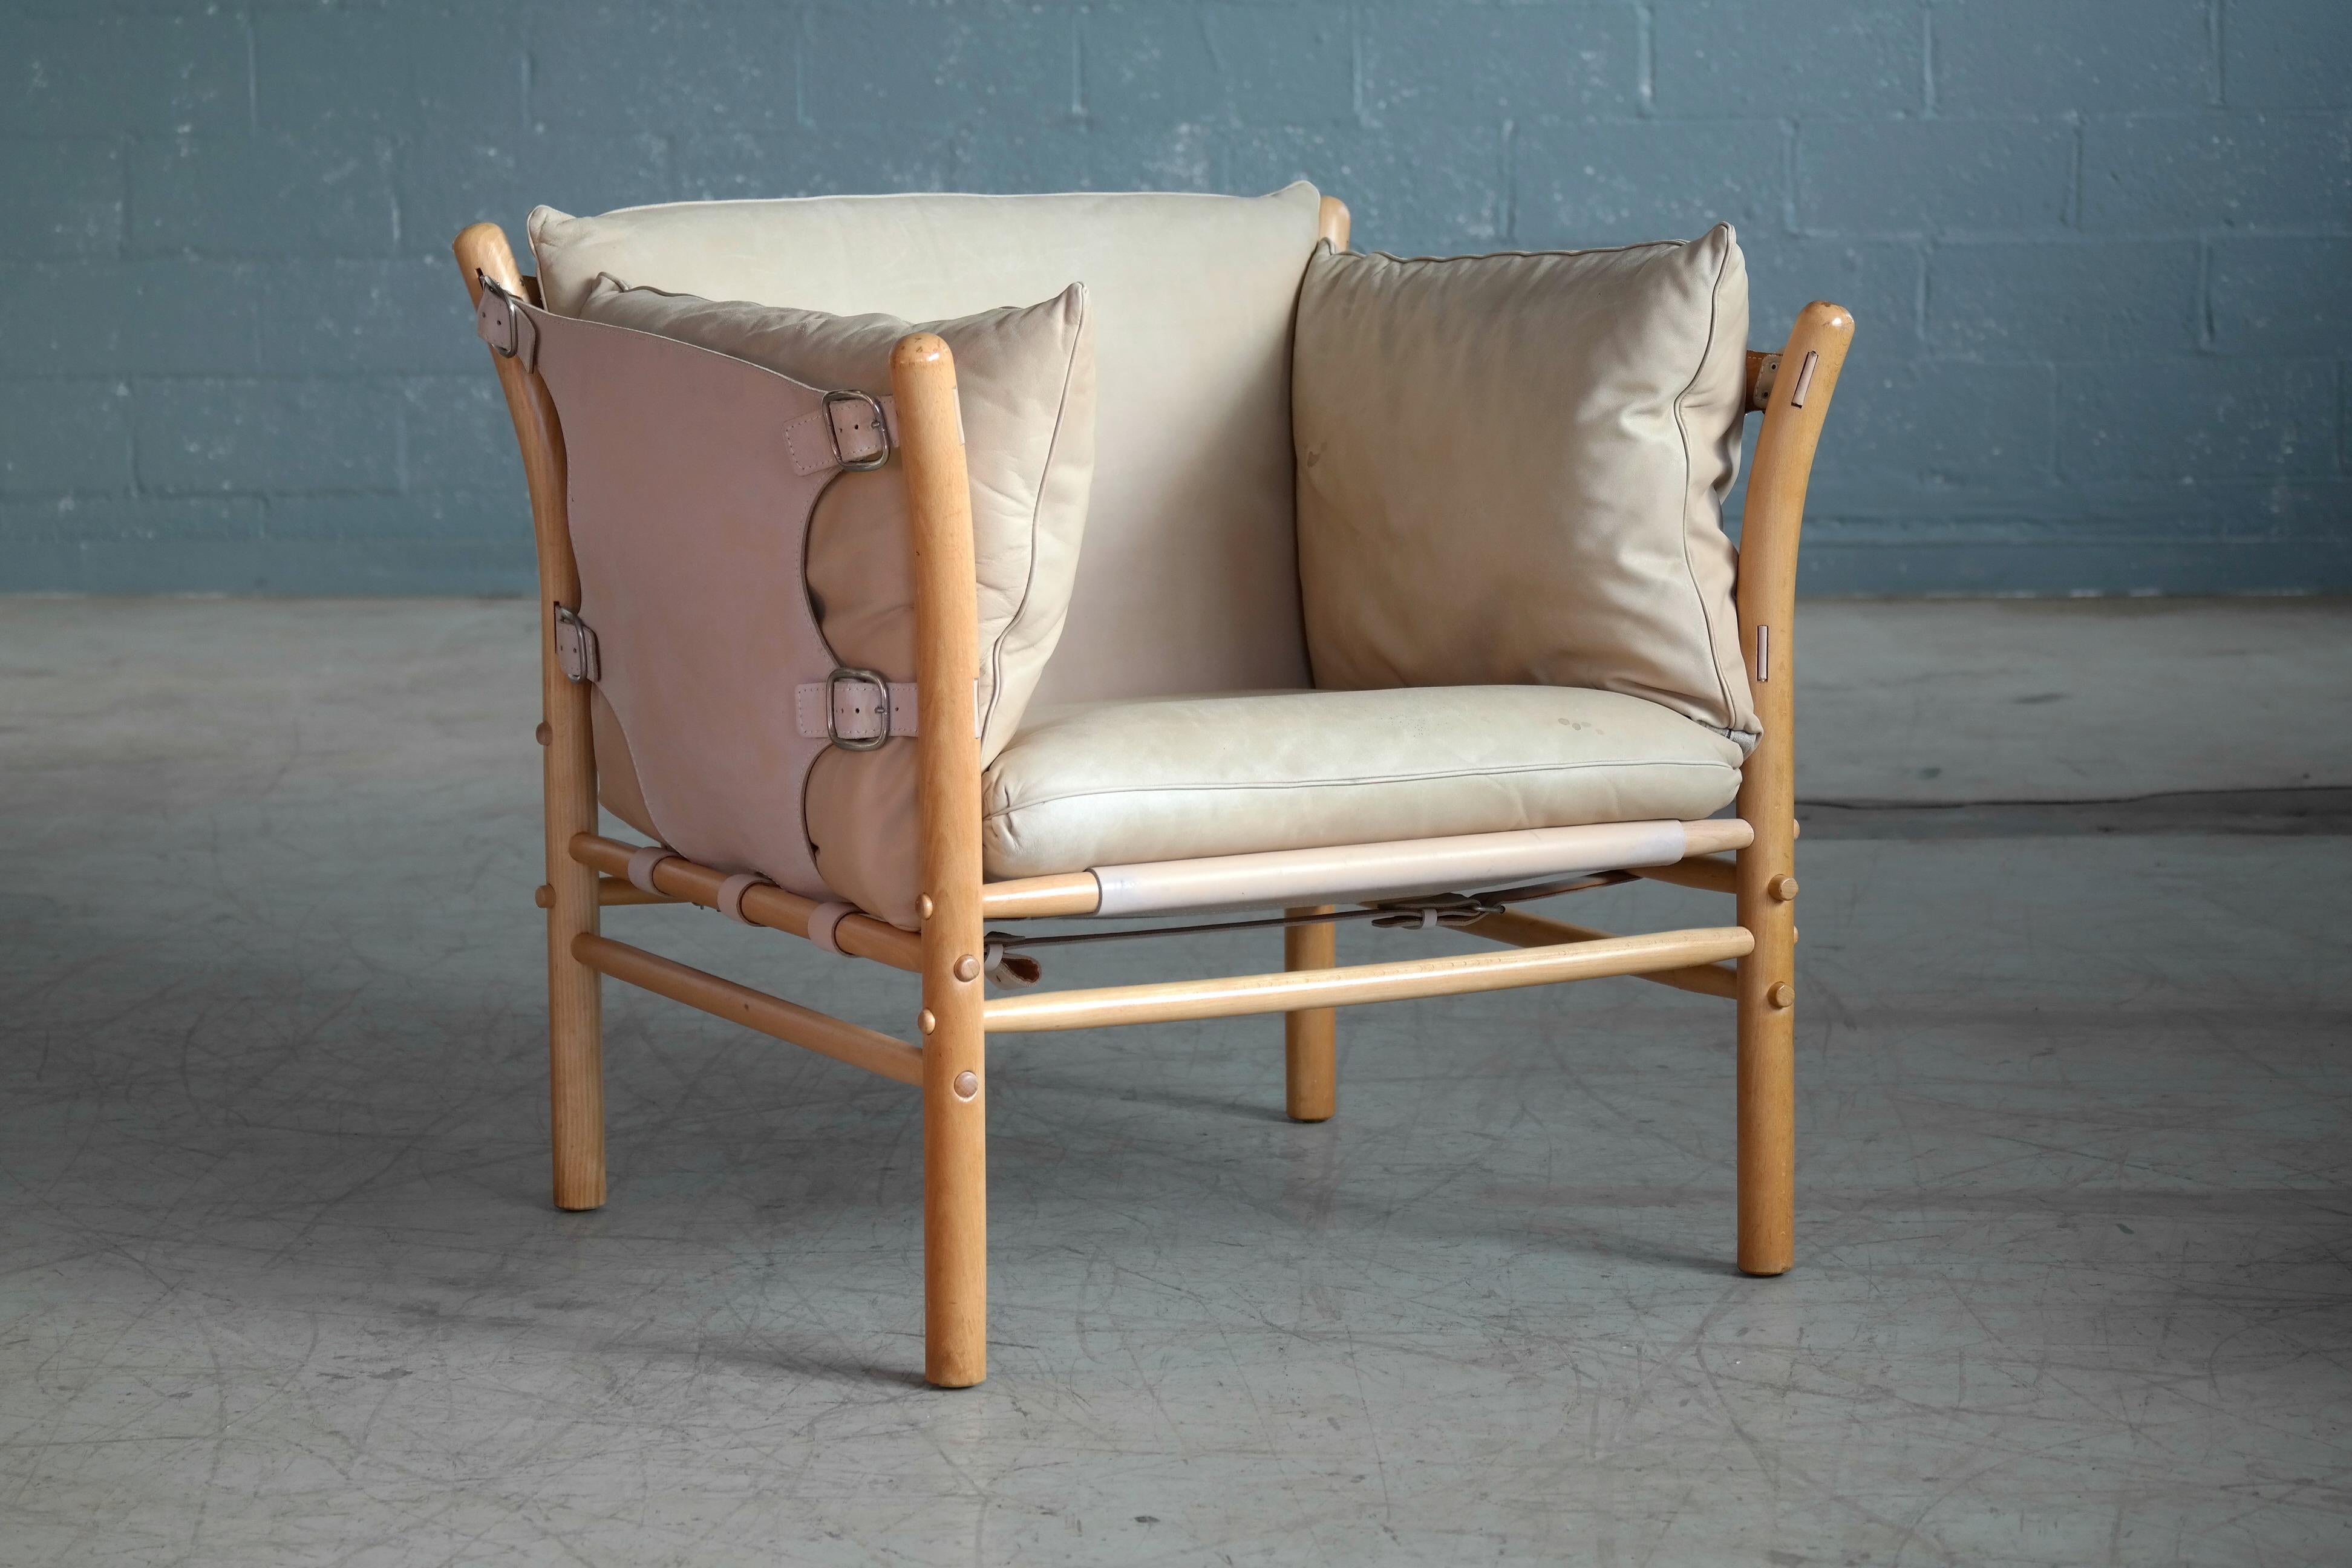 Beautiful 1960s safari chair in cream and tan leather and blond beech wood designed by Arne Norell in the 1960s for Norell Mobler, Sweden. The chair is assembled without any screws or hardware and held together by the heavy gauge saddle leather with